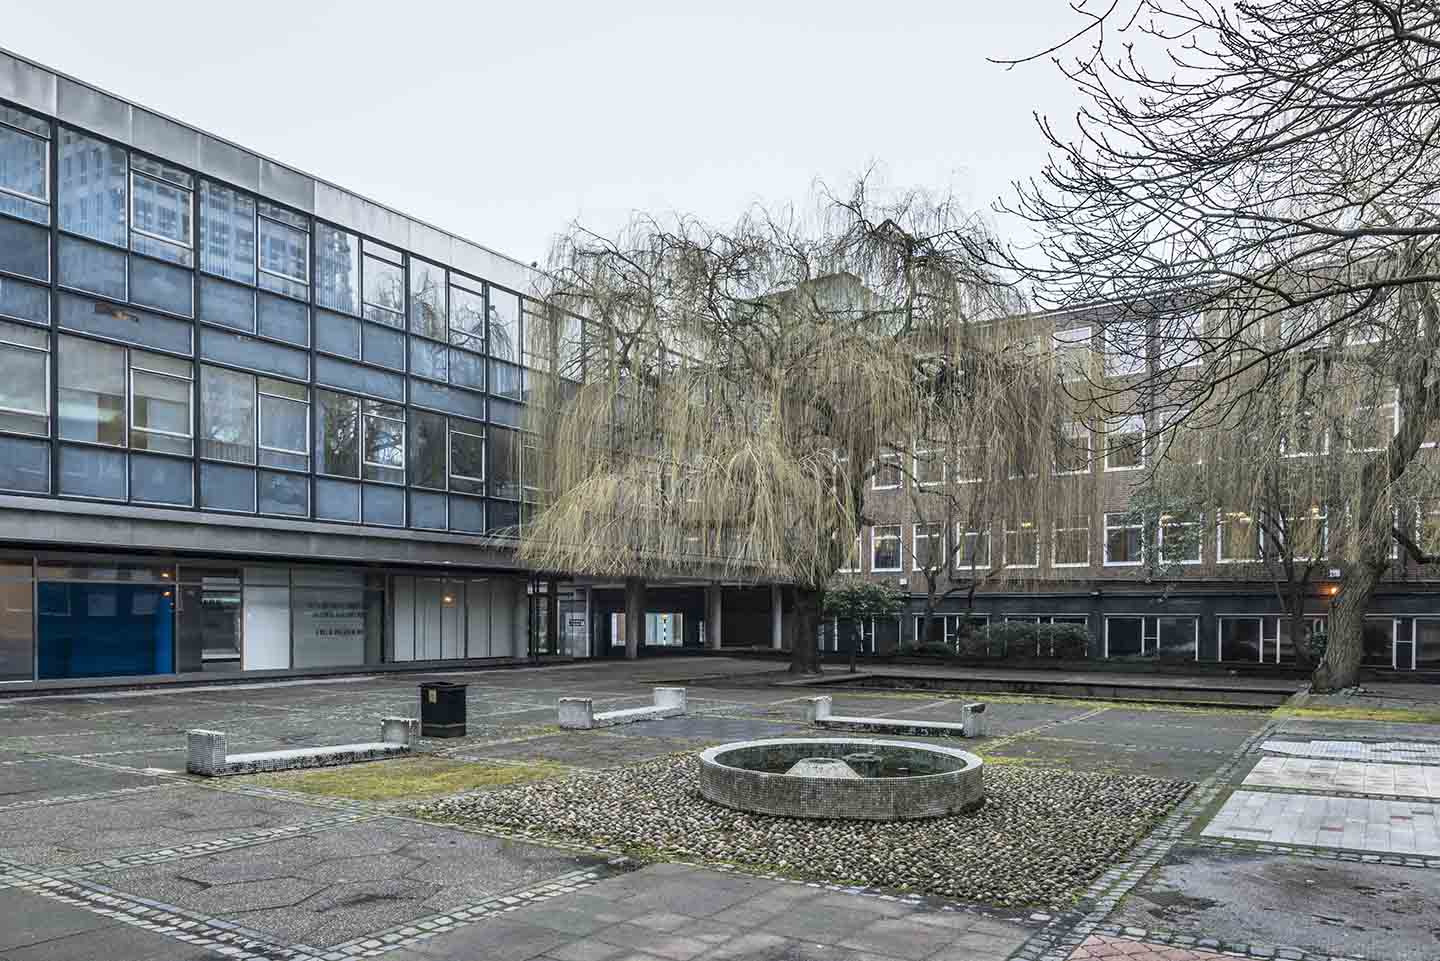 Courtyard of the Architecture and Planning Department, Earl Street